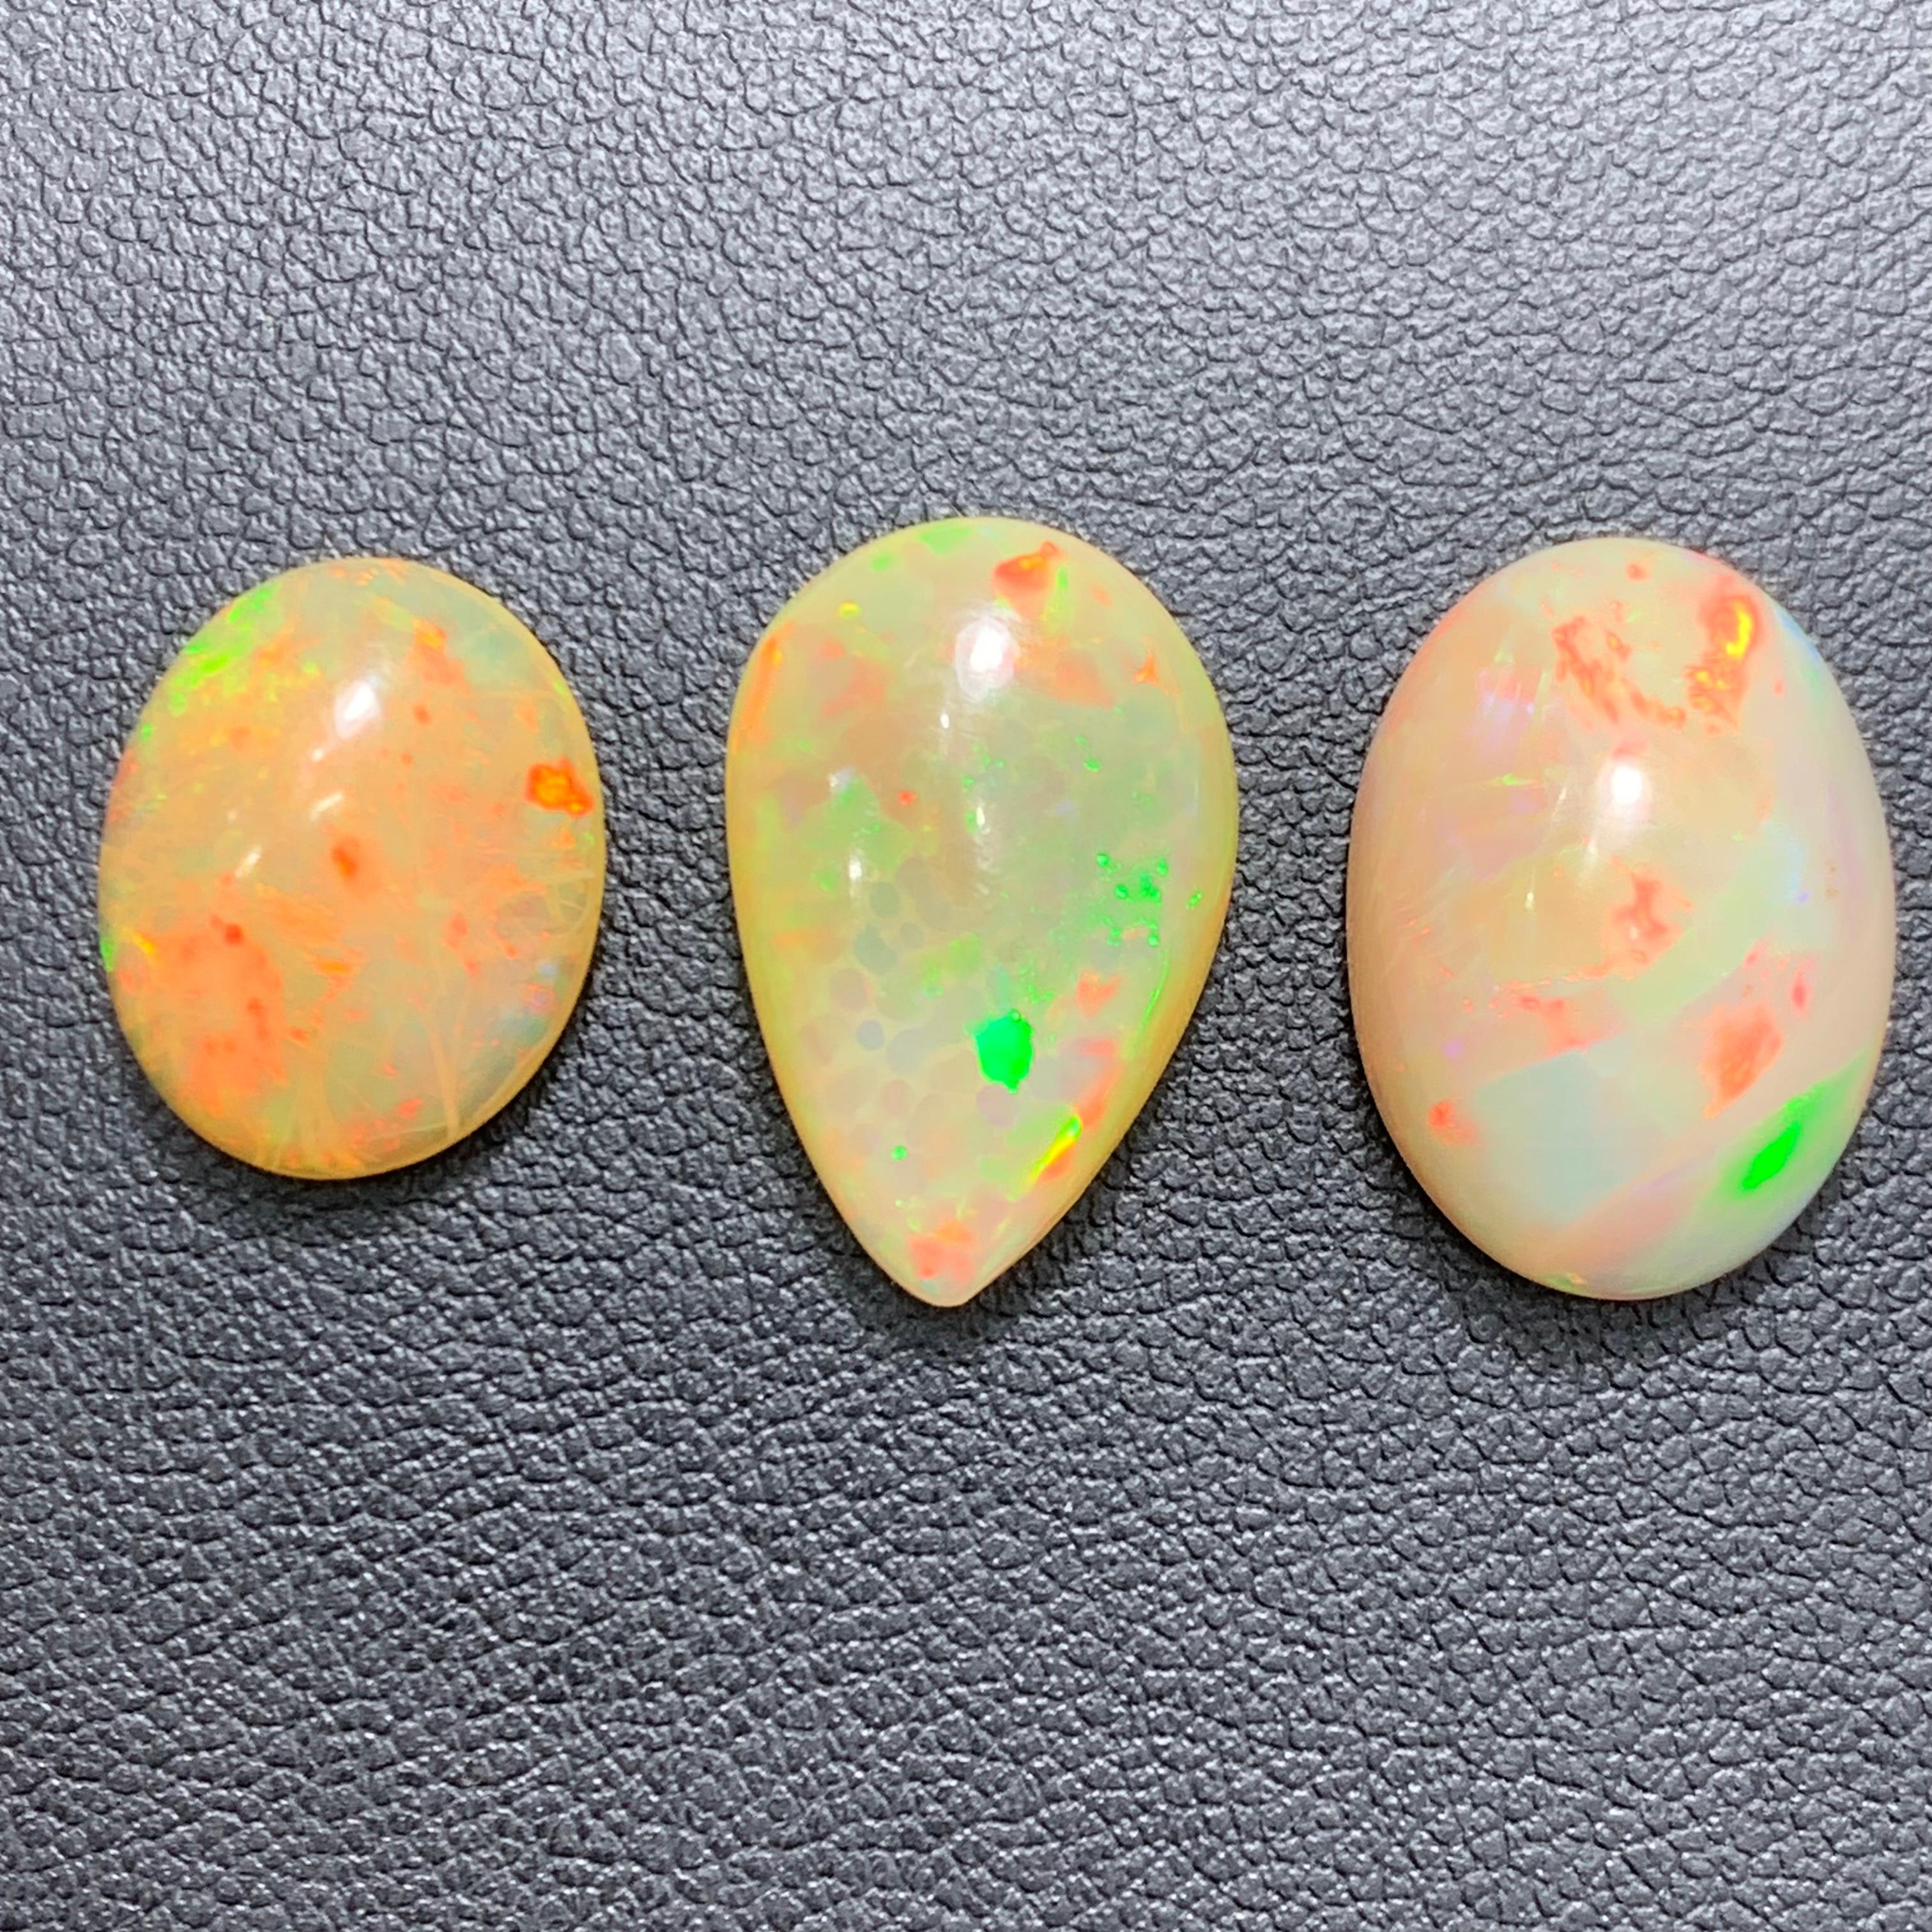 Contemporary Rare Orange Creamy Natural Fire Opal Gemstone Cabochons, 20 Ct for Jewelry